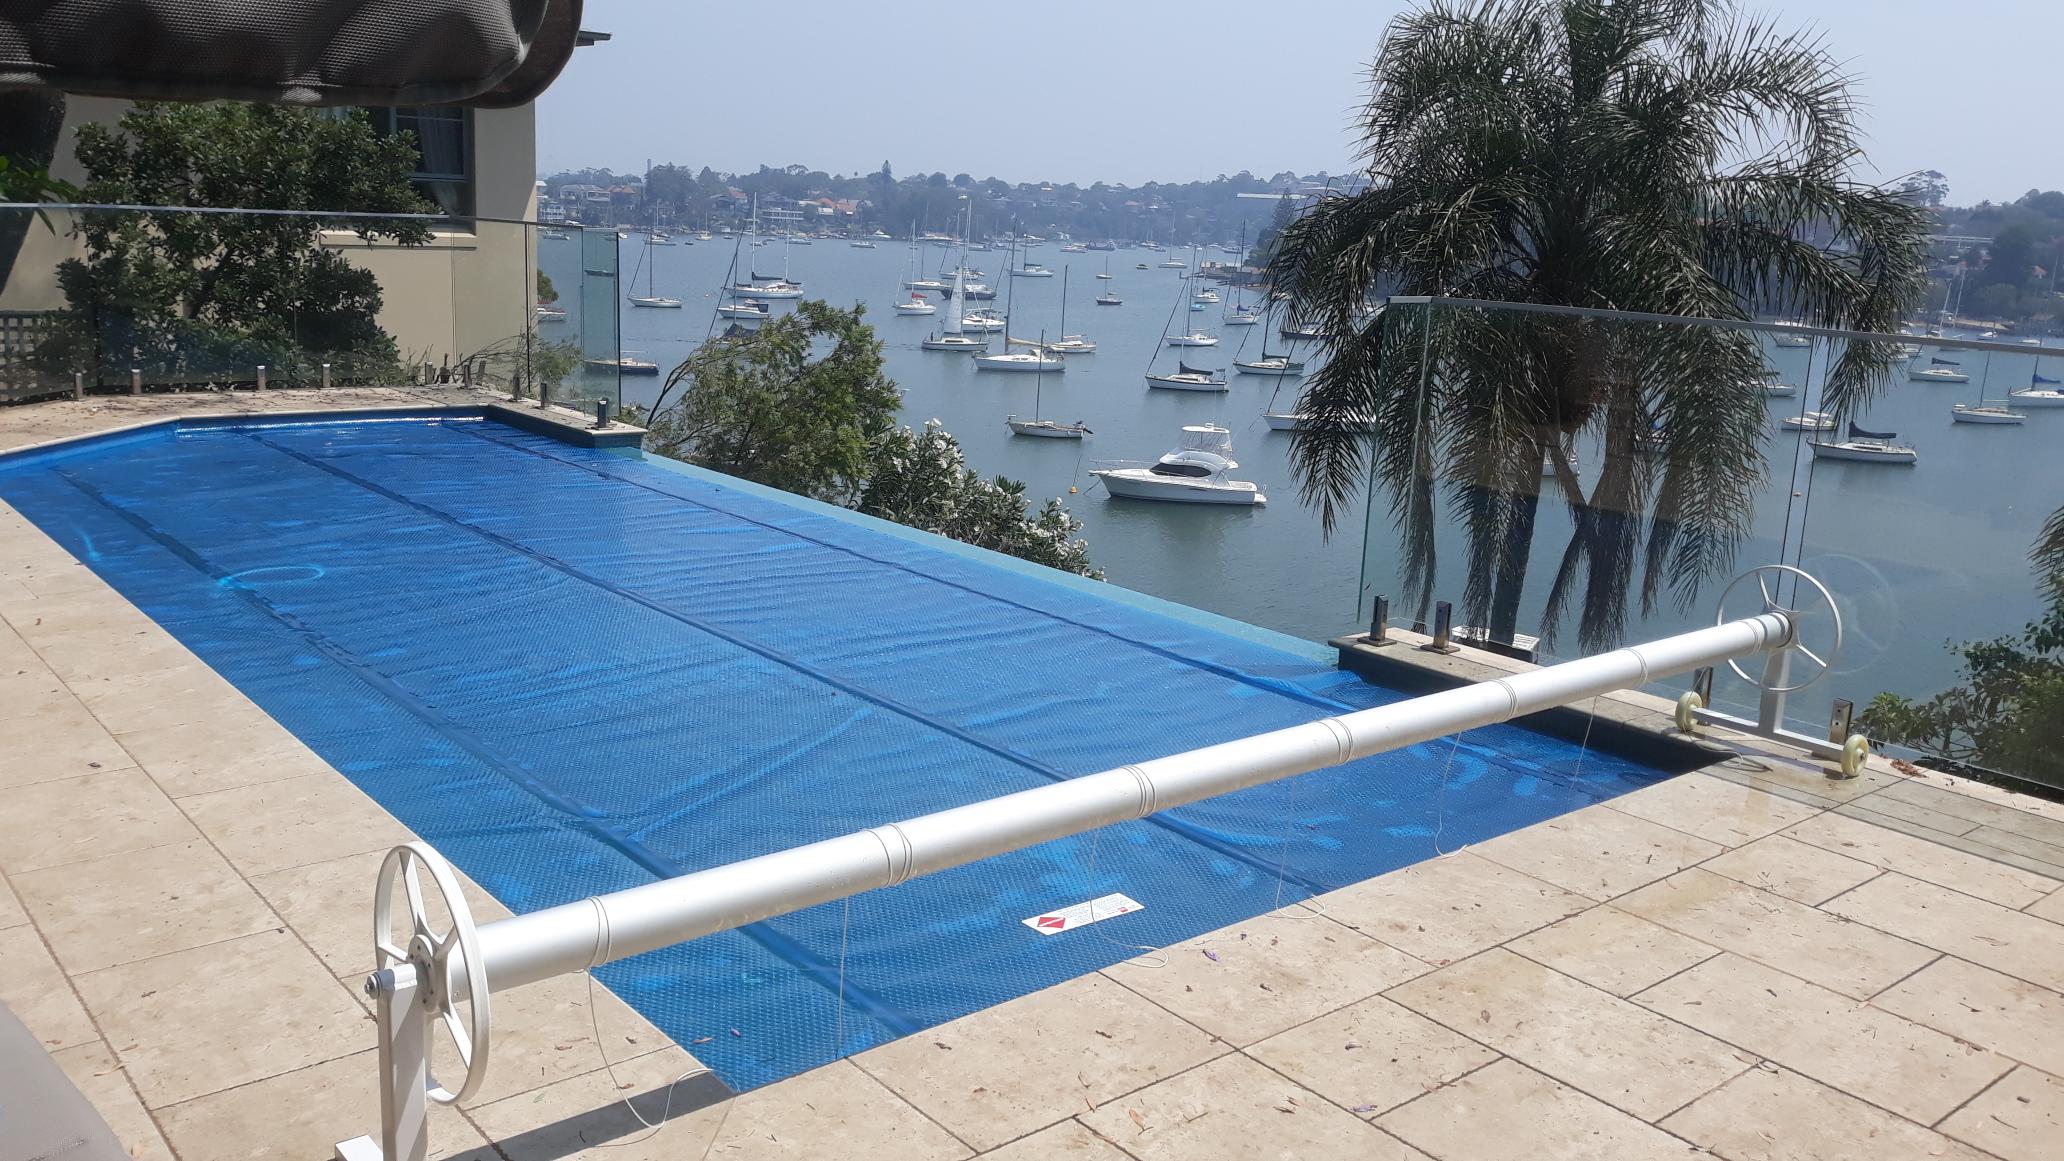 Stunning view from this installation! This infinity edge swimming pool looks very relaxing. 